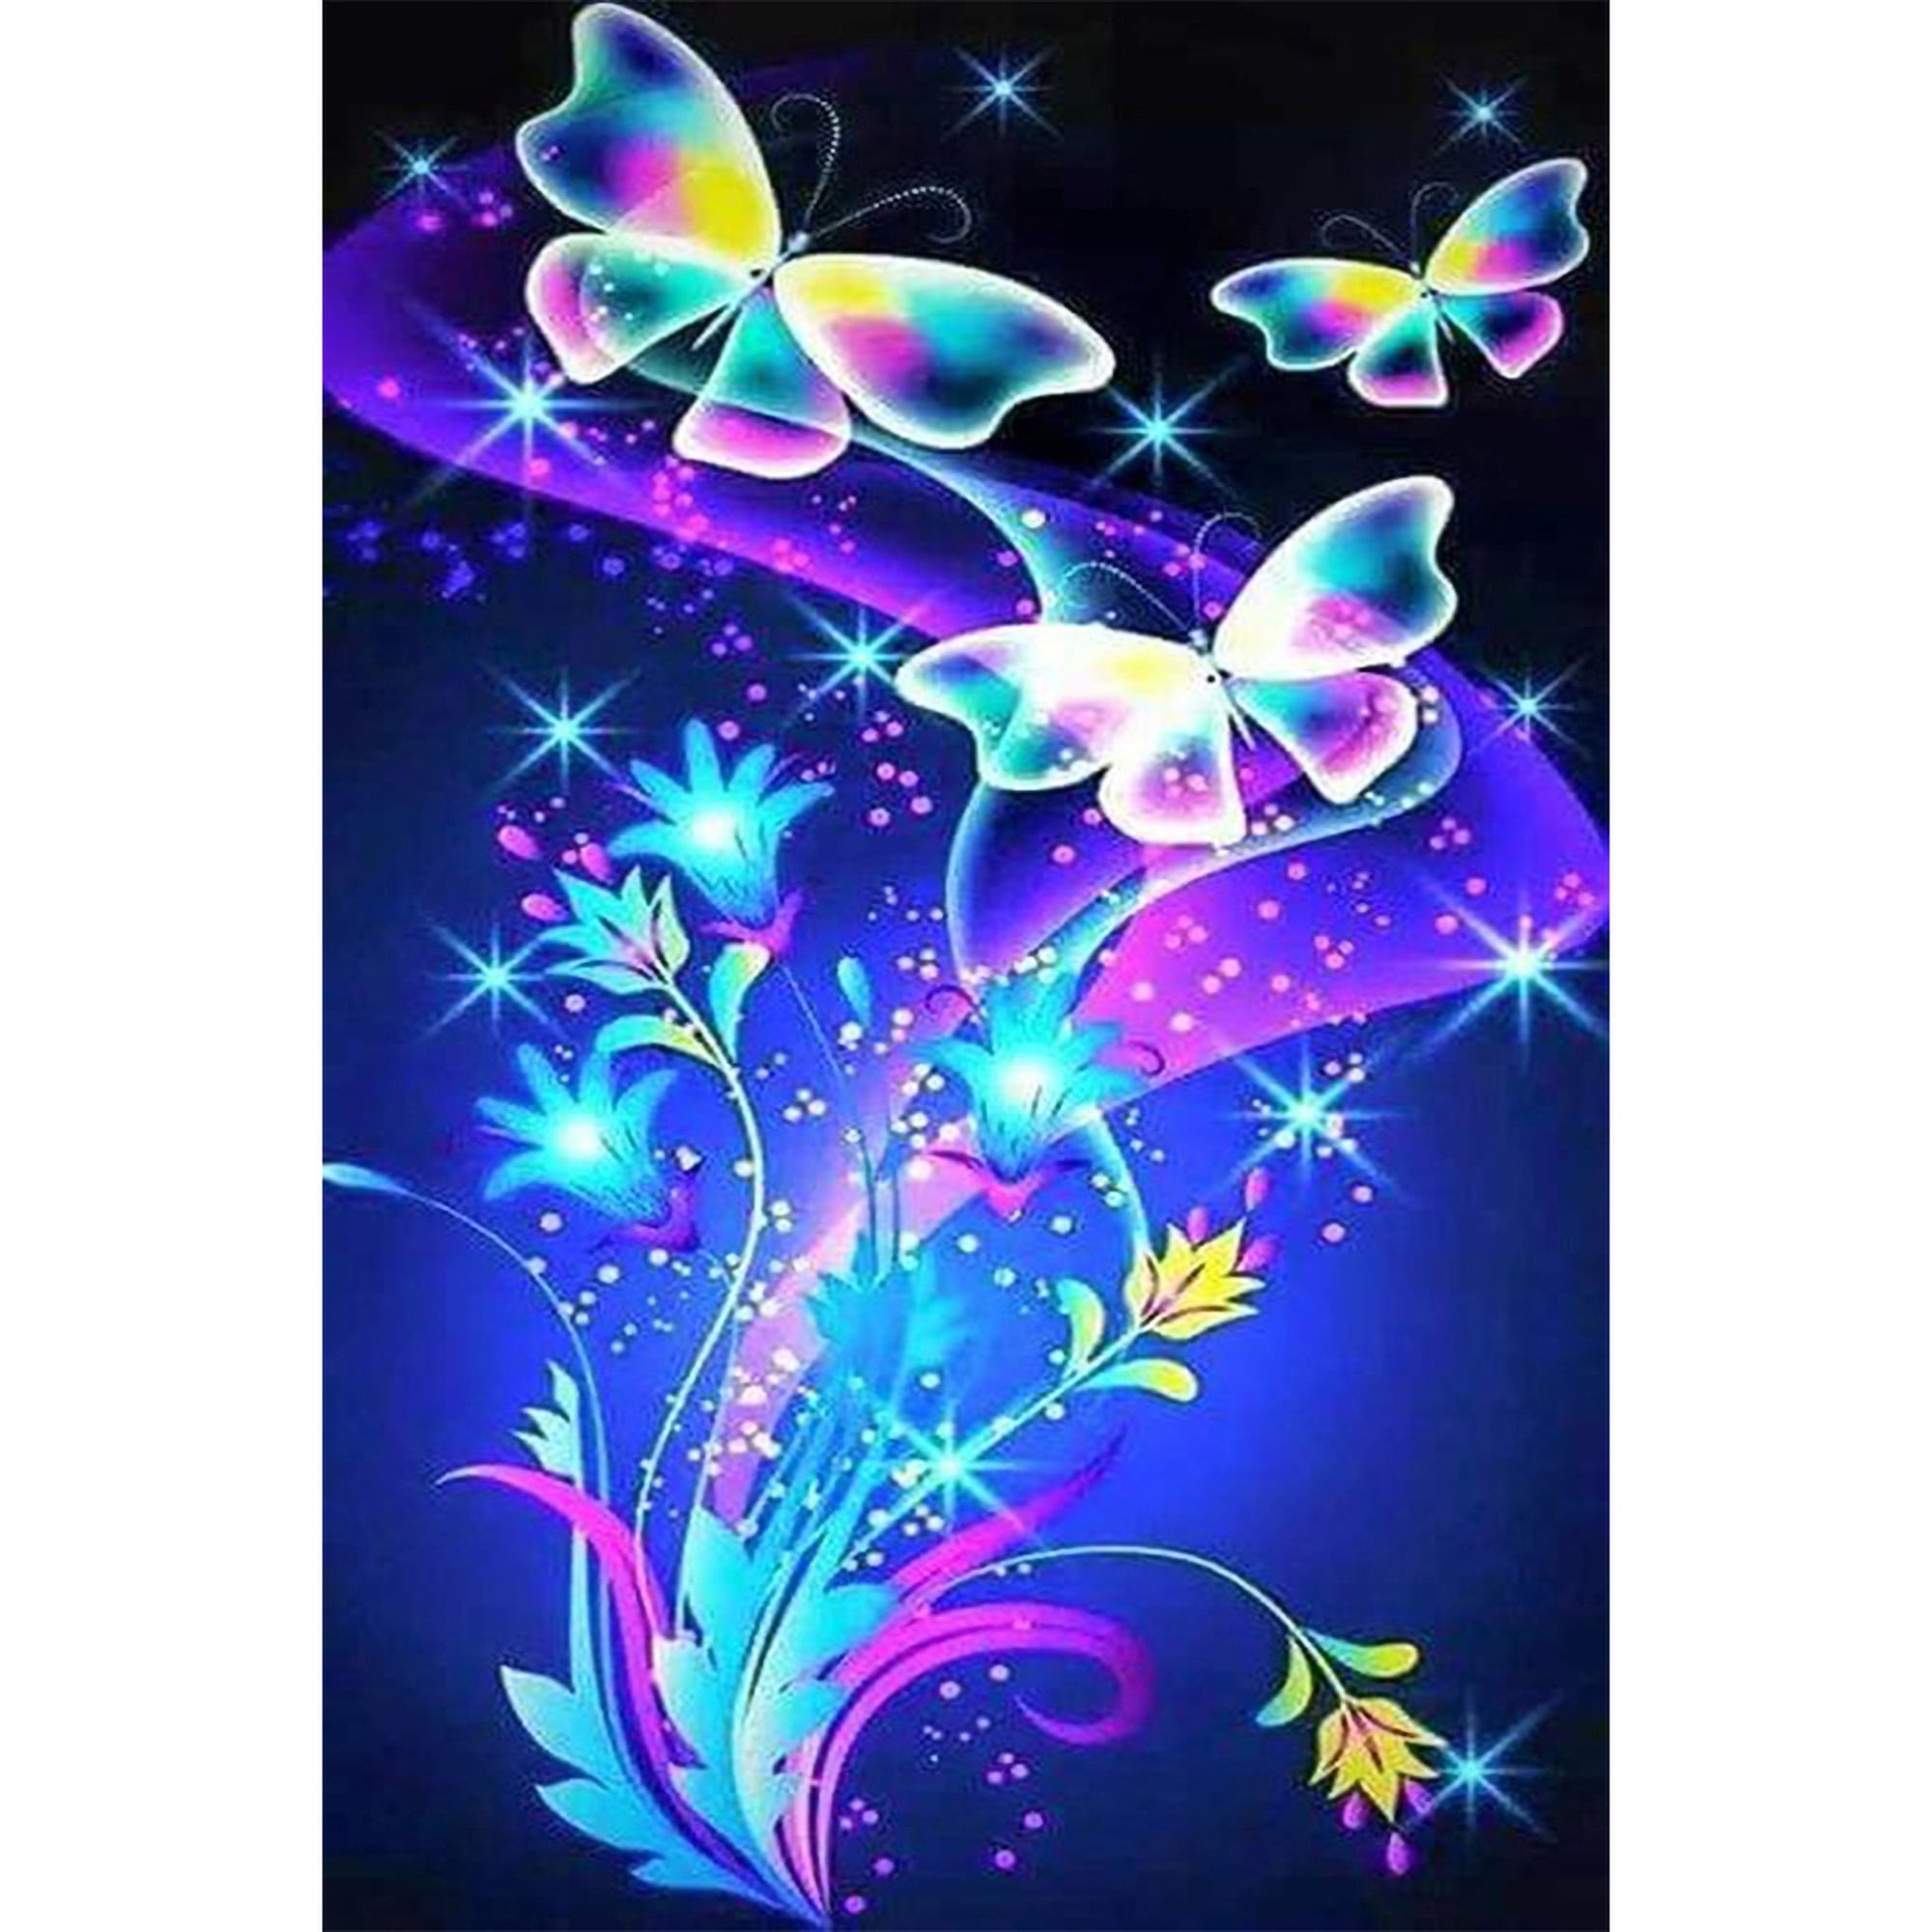 Butterfly SWEETHOMEDECO 5D Diamond Painting Full Drill